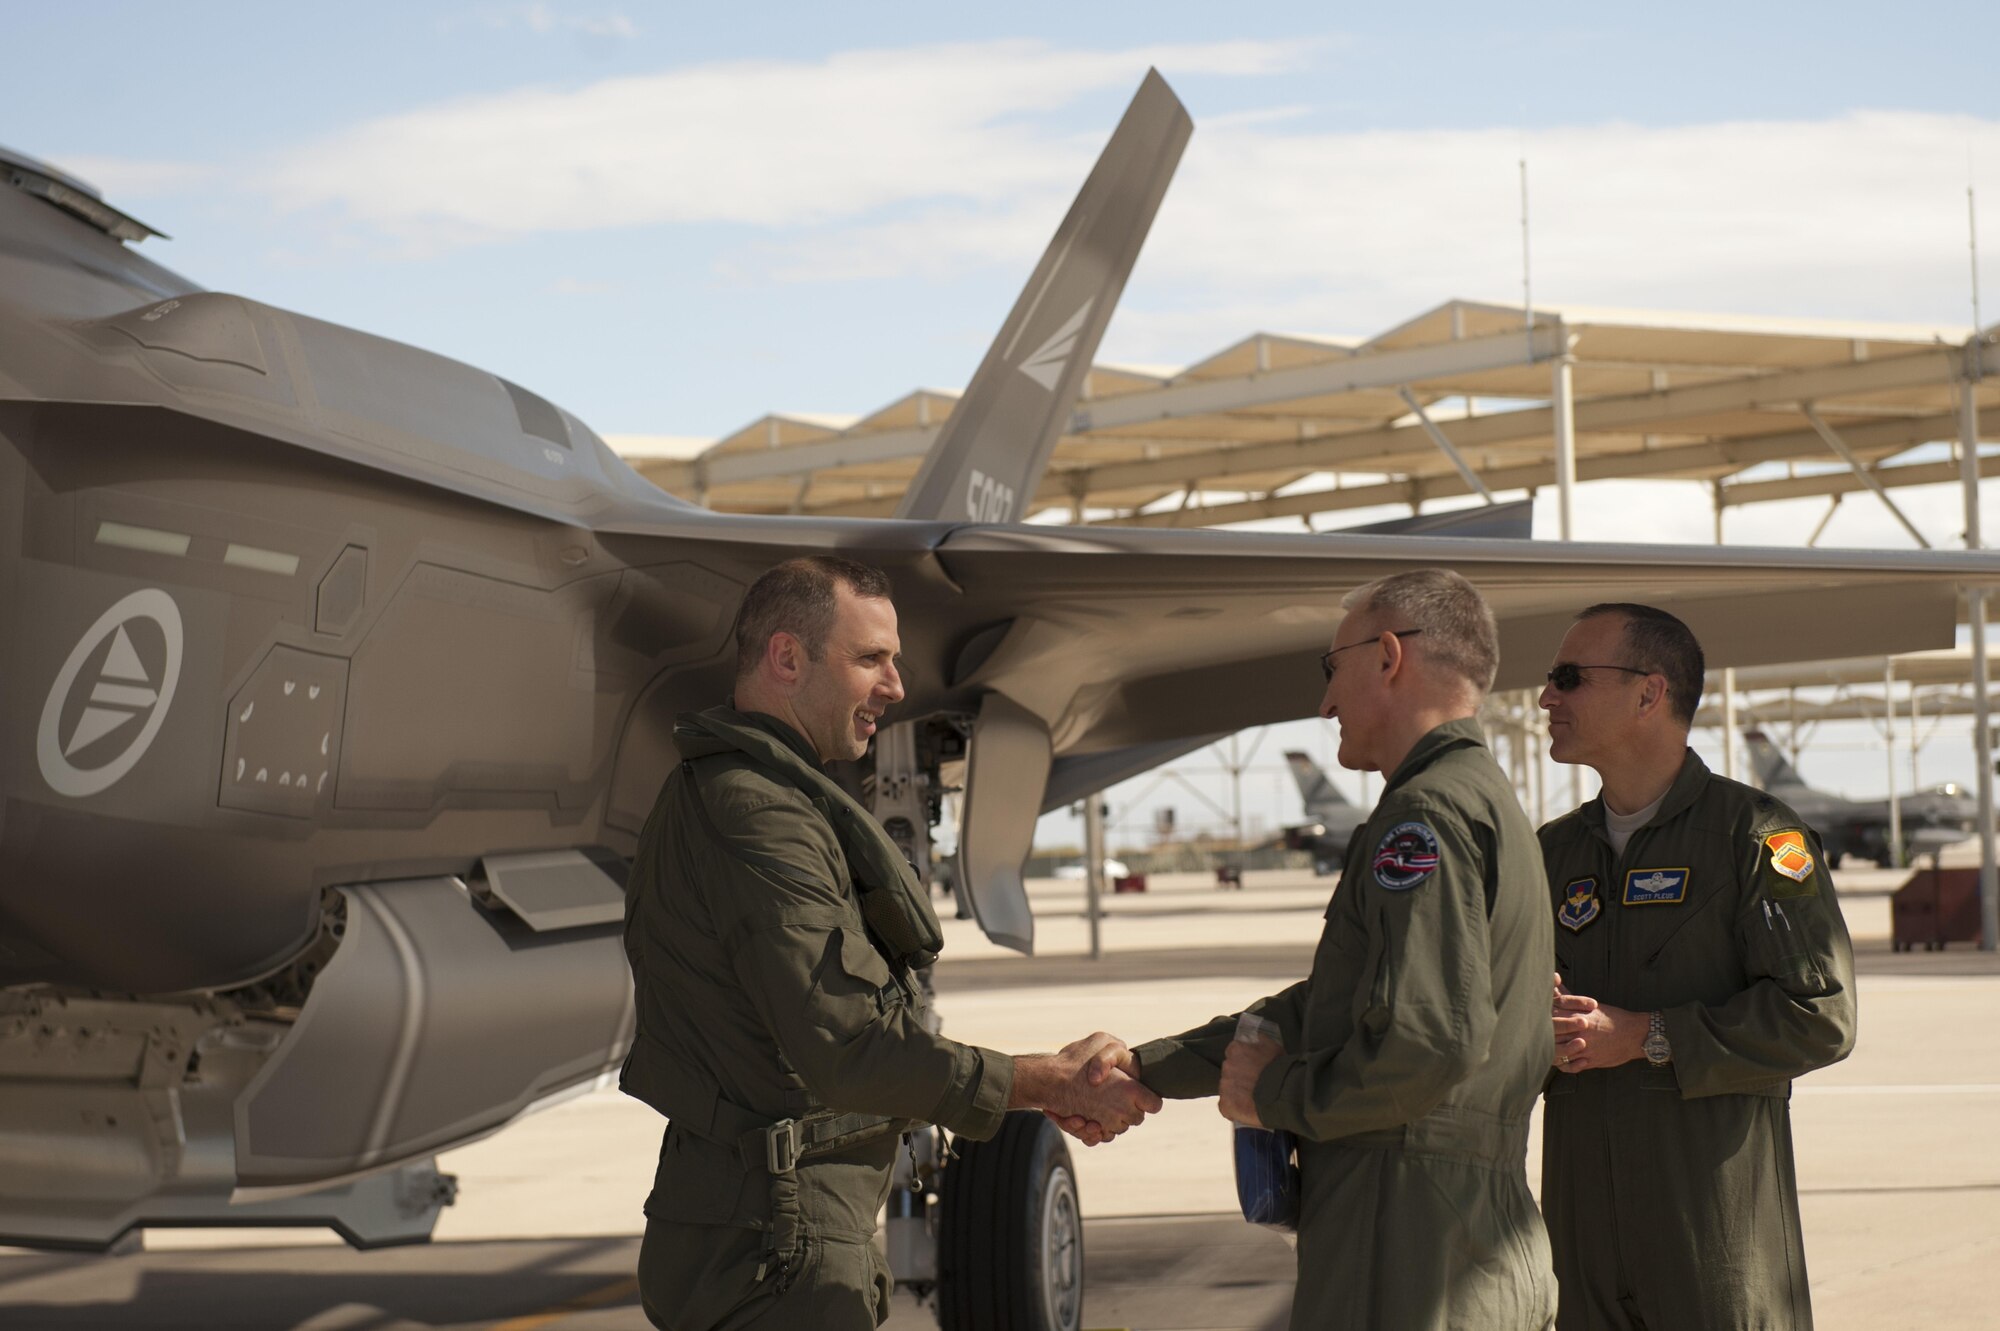 Maj. Gen. Morten Klever, the program director of the Norwegian F-35 program, accepts the first two Norwegian F-35 Lightning IIs after they arrived at Luke Air Force Base, Ariz., Nov. 10, 2015. Shortly after, a Norwegian pilot flew the F-35 for the first time, in conjunction with the Royal Norwegian Air Force’s birthday. (U.S. Air Force photo/Staff Sgt. Staci Miller)